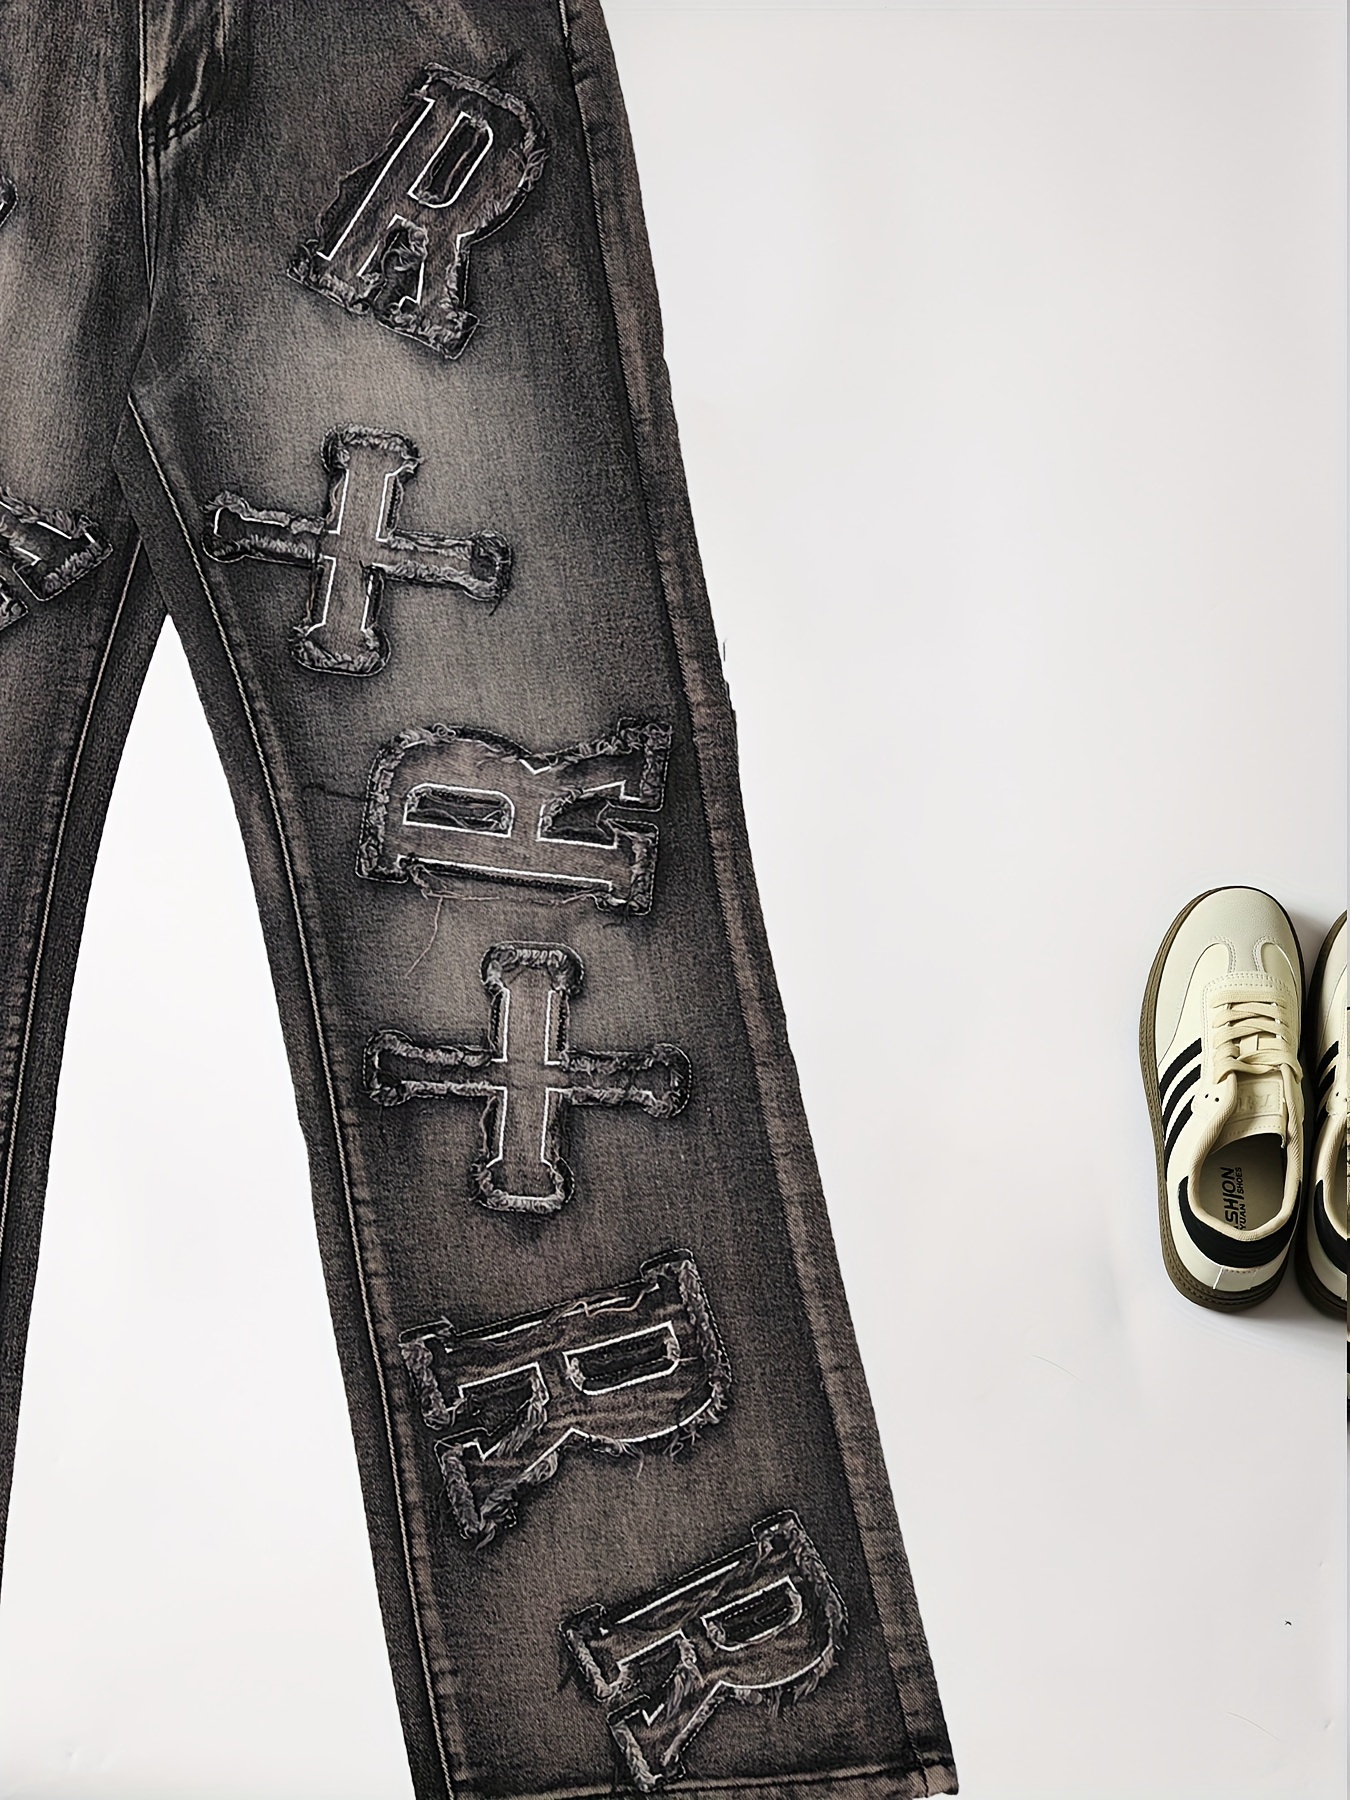 Chrome Hearts 75 Cross Patch Jeans (1 of 1)